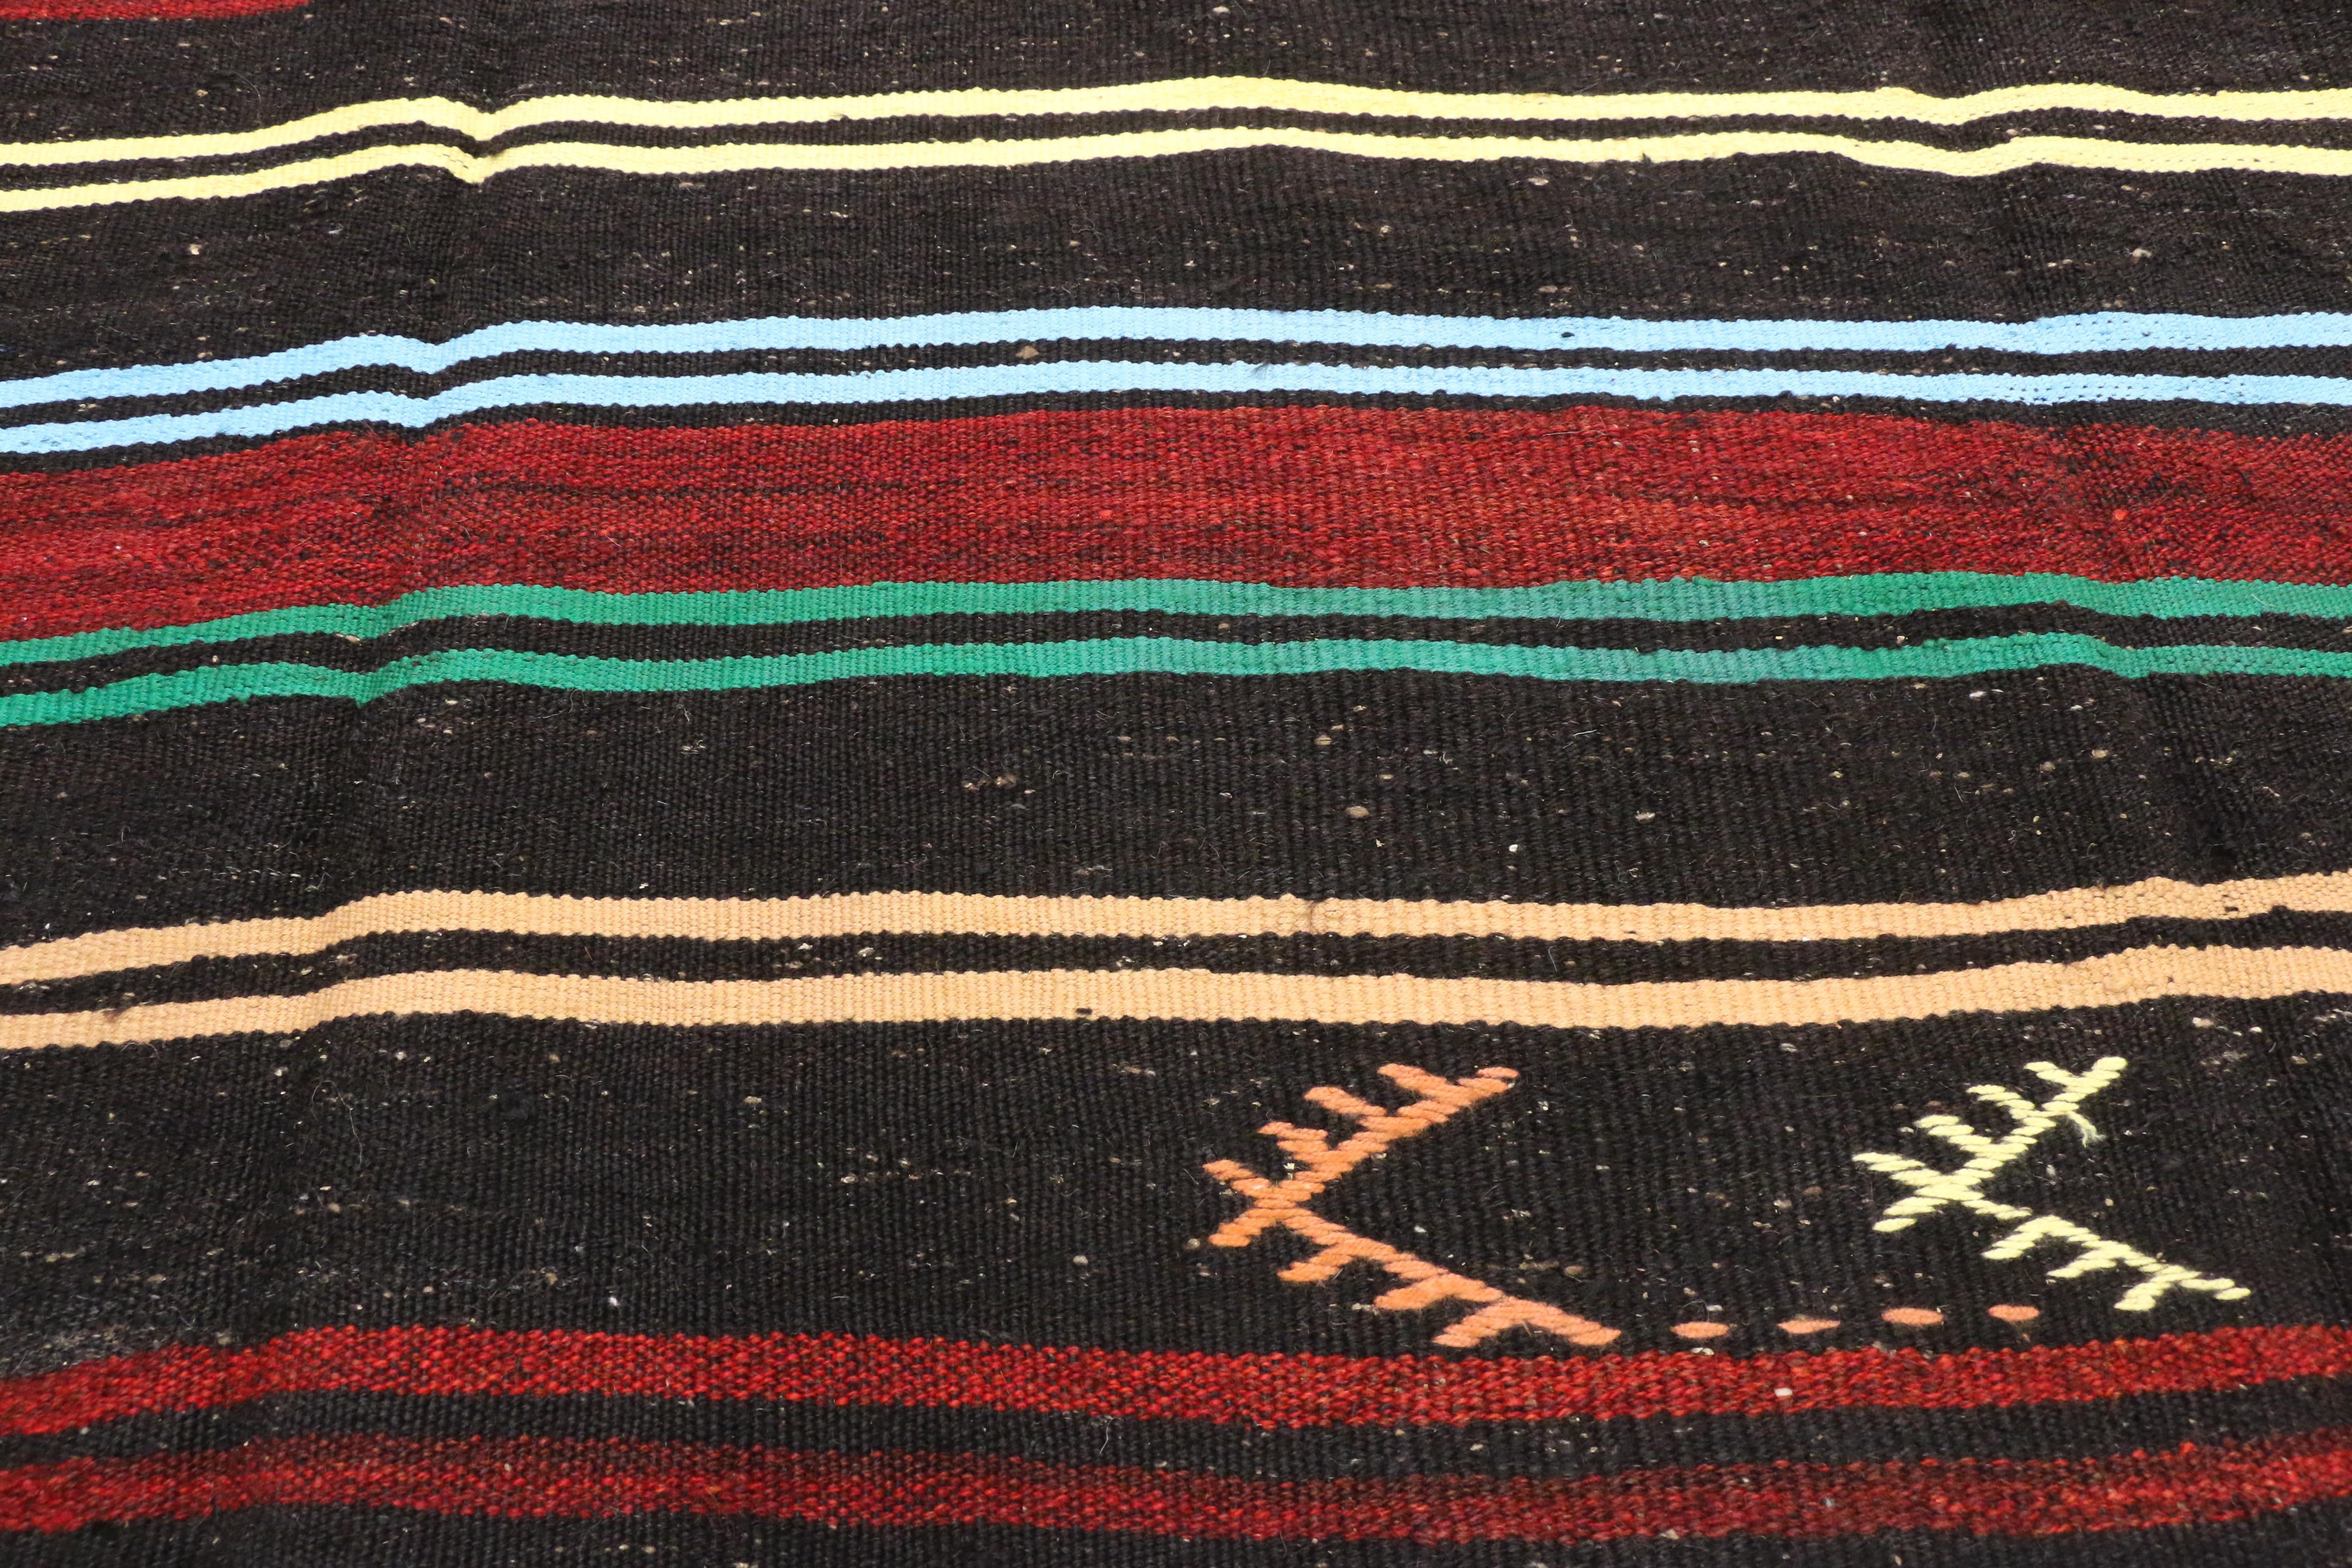 Vintage Turkish Kilim with Tribal Style, Flat-weave Striped Kilim Area Rug In Good Condition For Sale In Dallas, TX